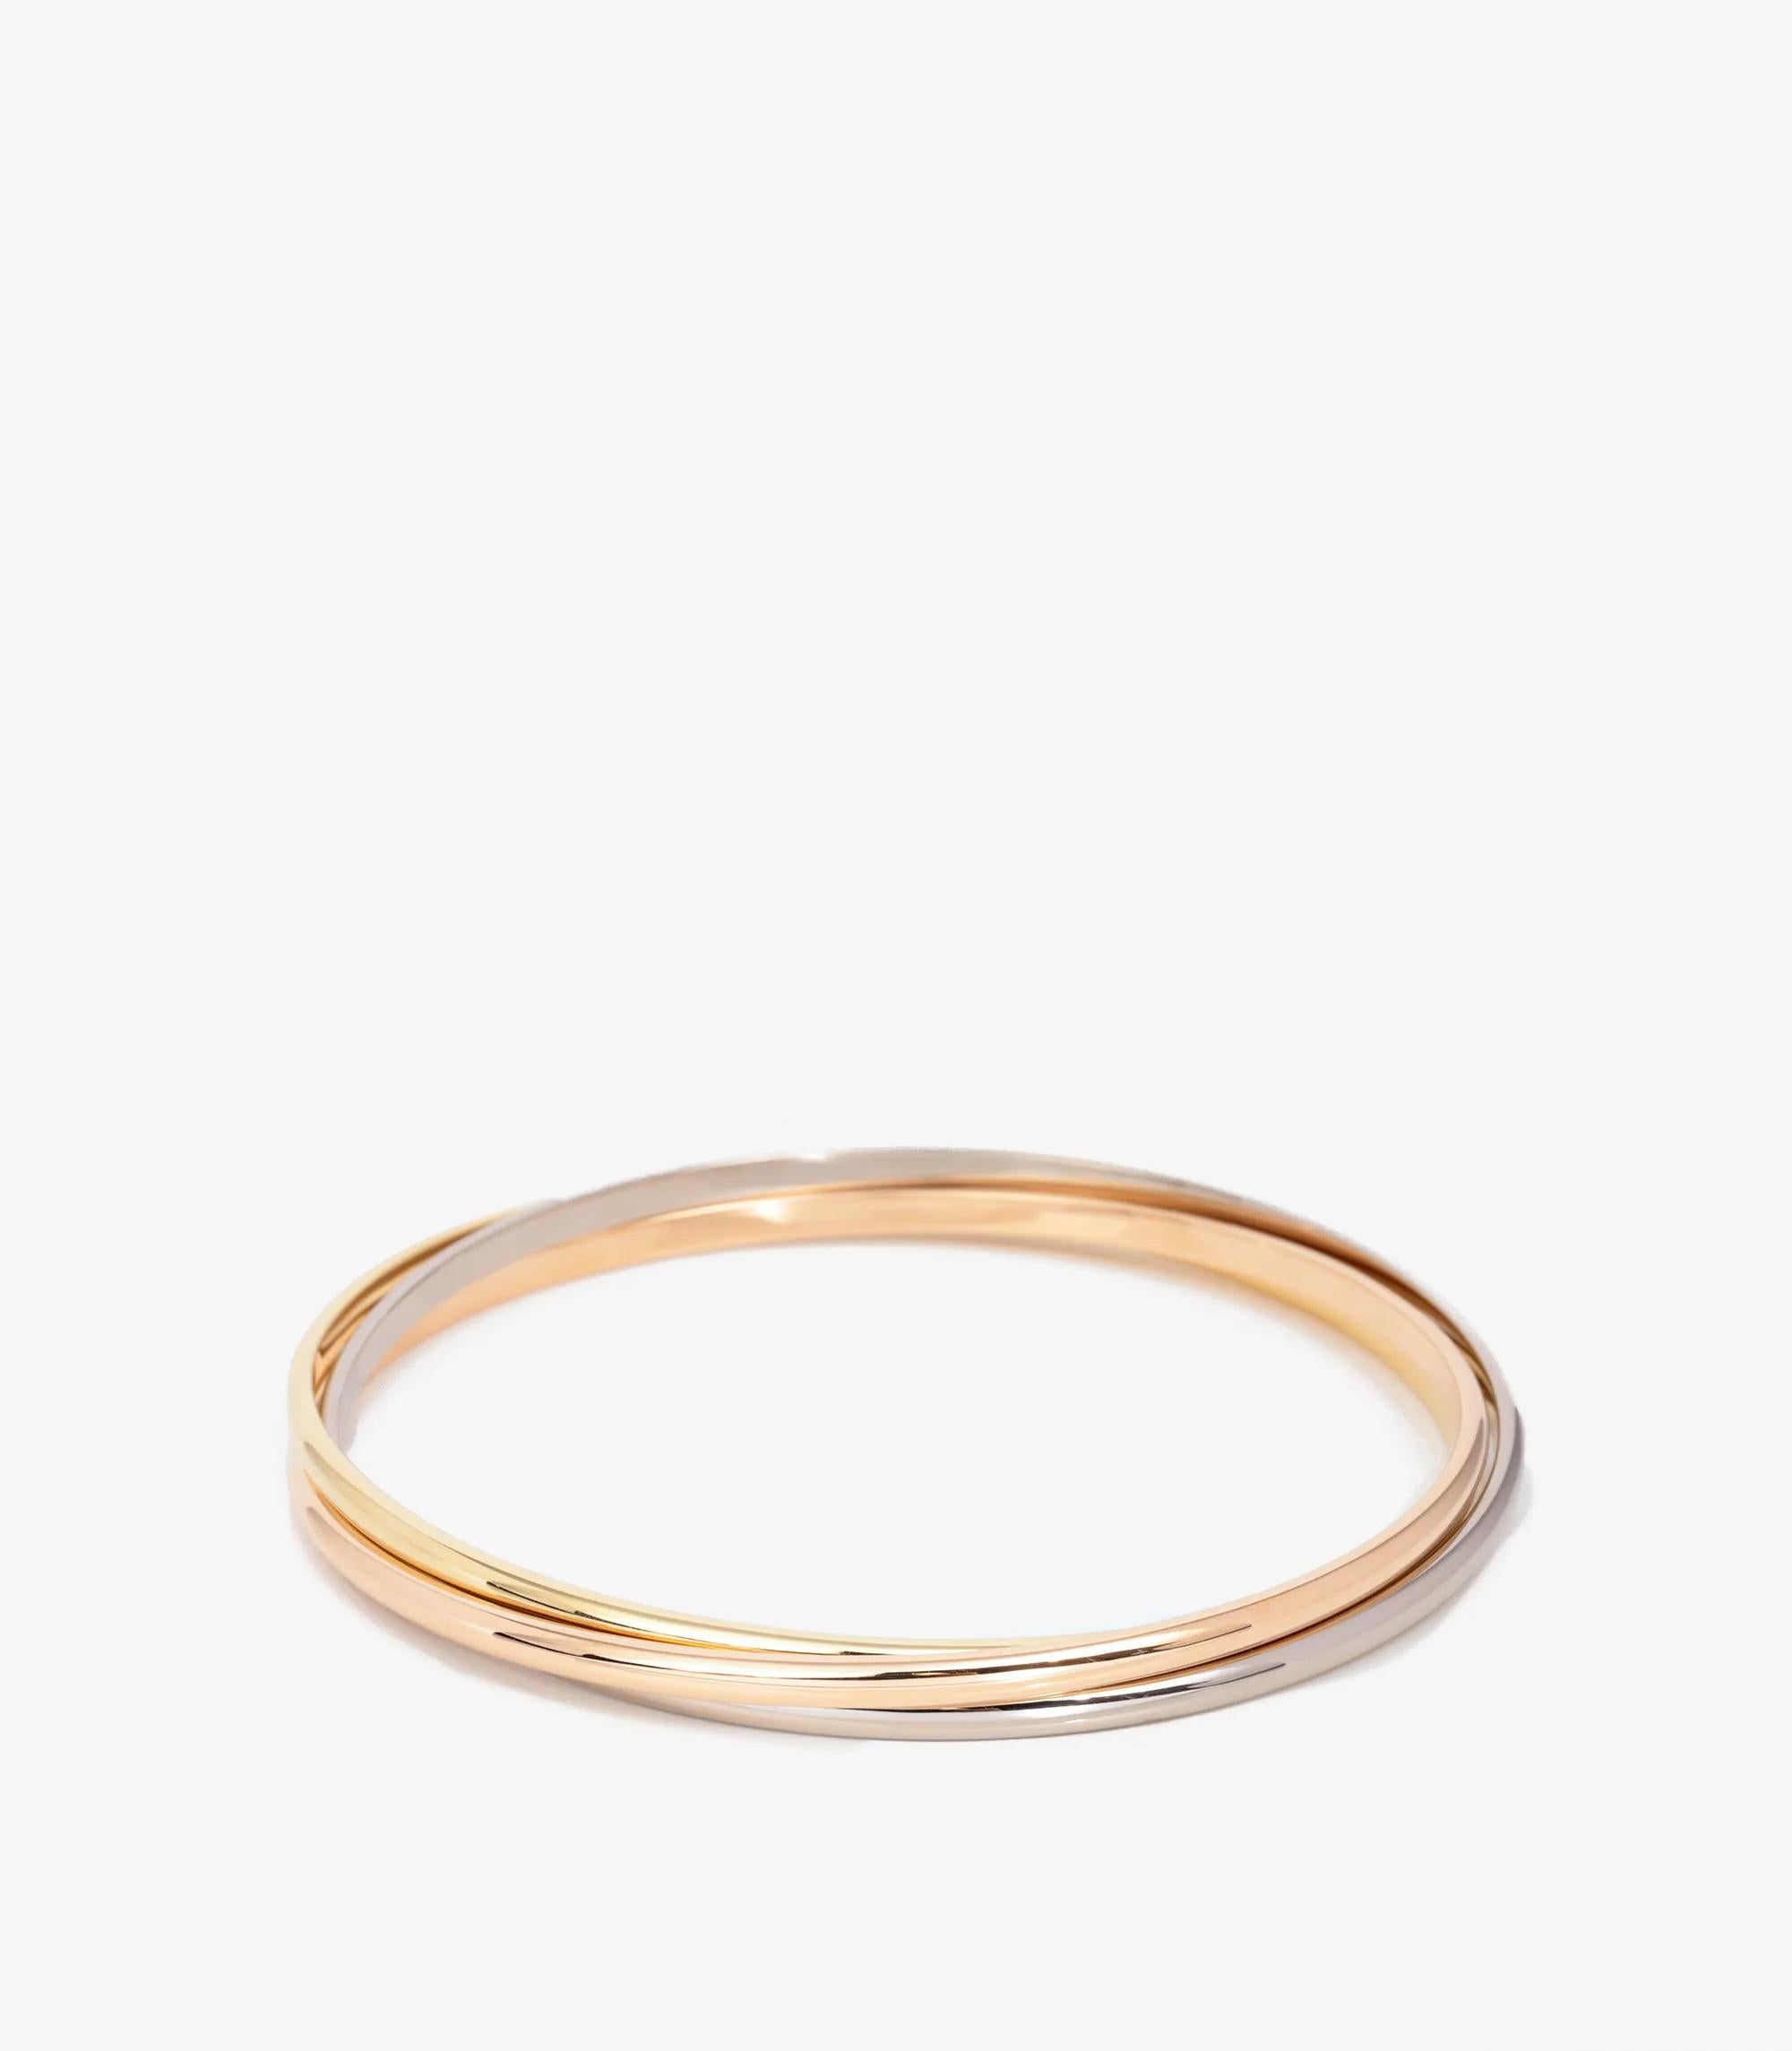 Cartier 18ct White Gold, 18ct Yellow Gold And 18ct Rose Gold Small Trinity Bangle

Brand- Cartier
Model- Small Trinity Bangle
Product Type- Bracelet
Serial Number- ET****
Age- Circa 2018
Accompanied By- Cartier Certificate
Material(s)- 18ct White